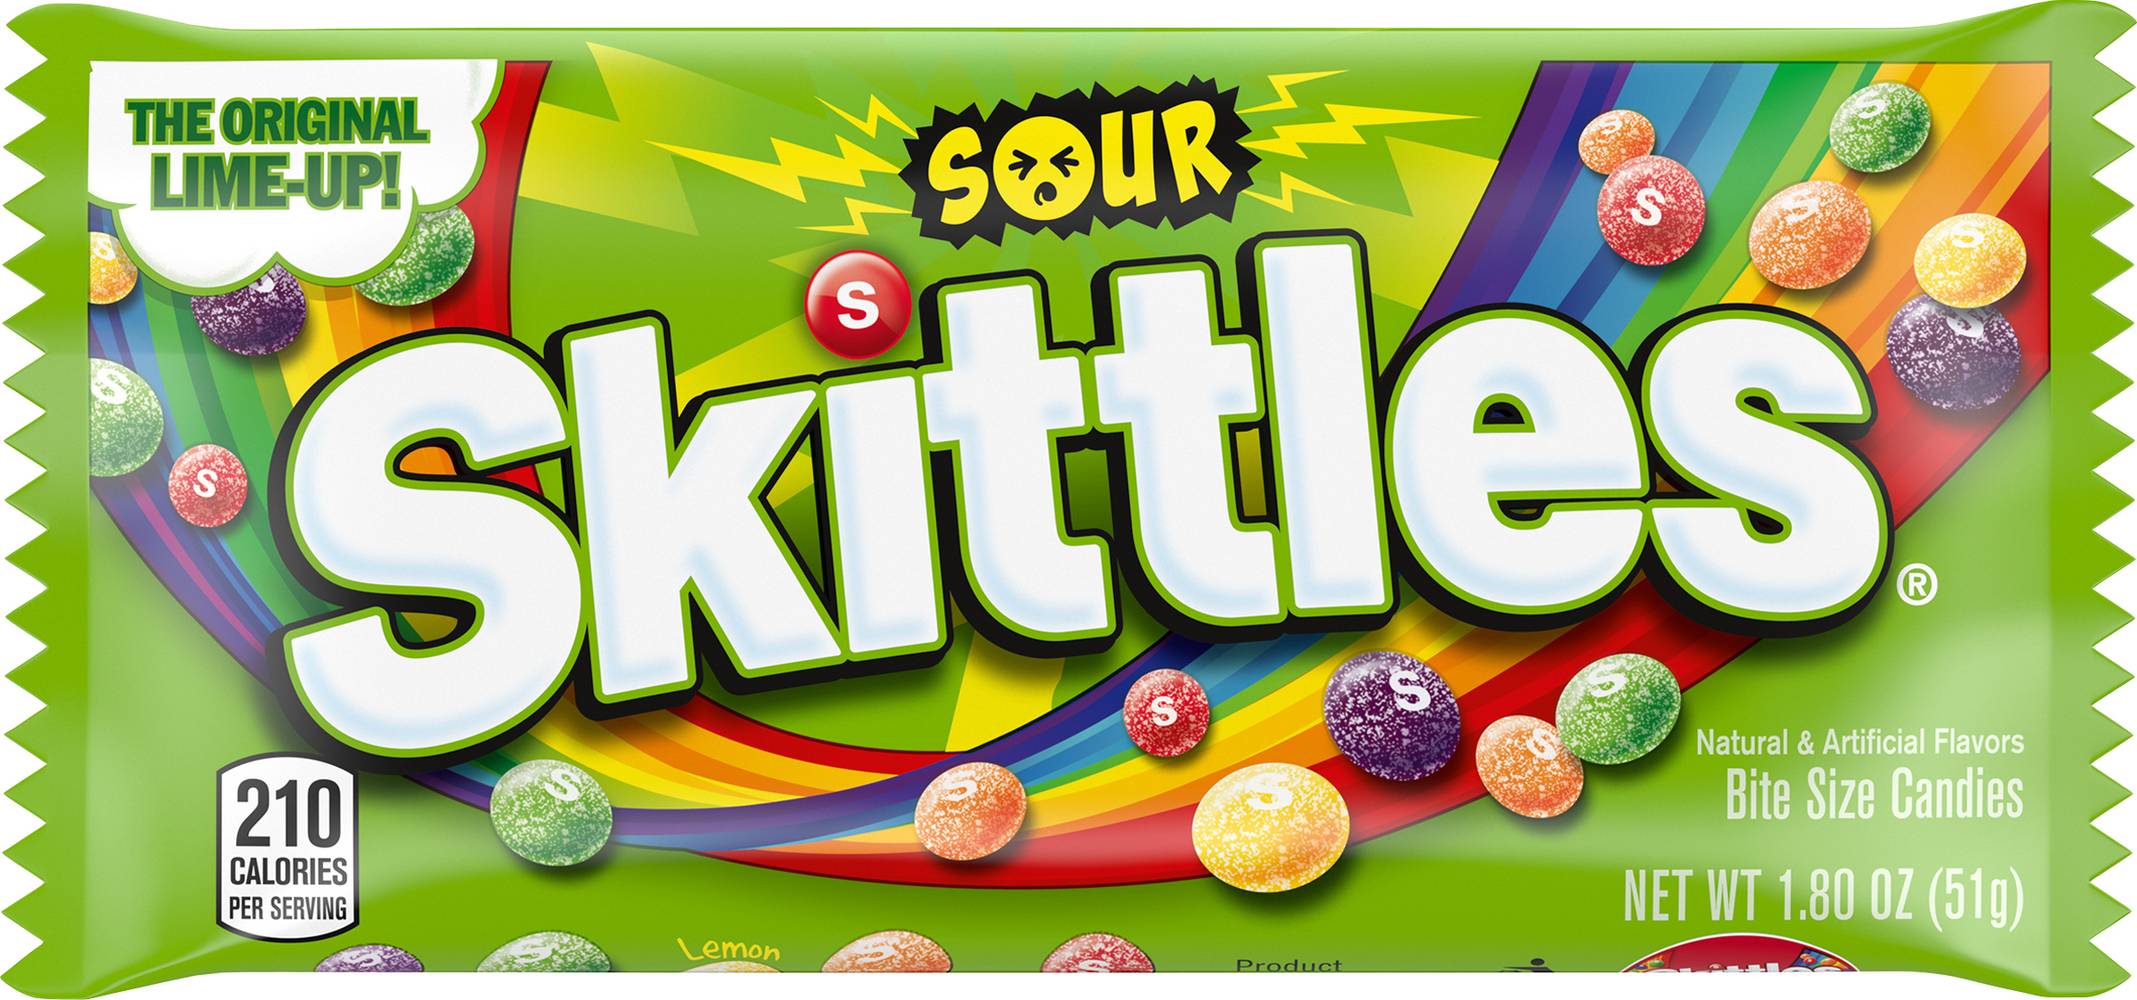 Skittles Bite Size Sour Candy